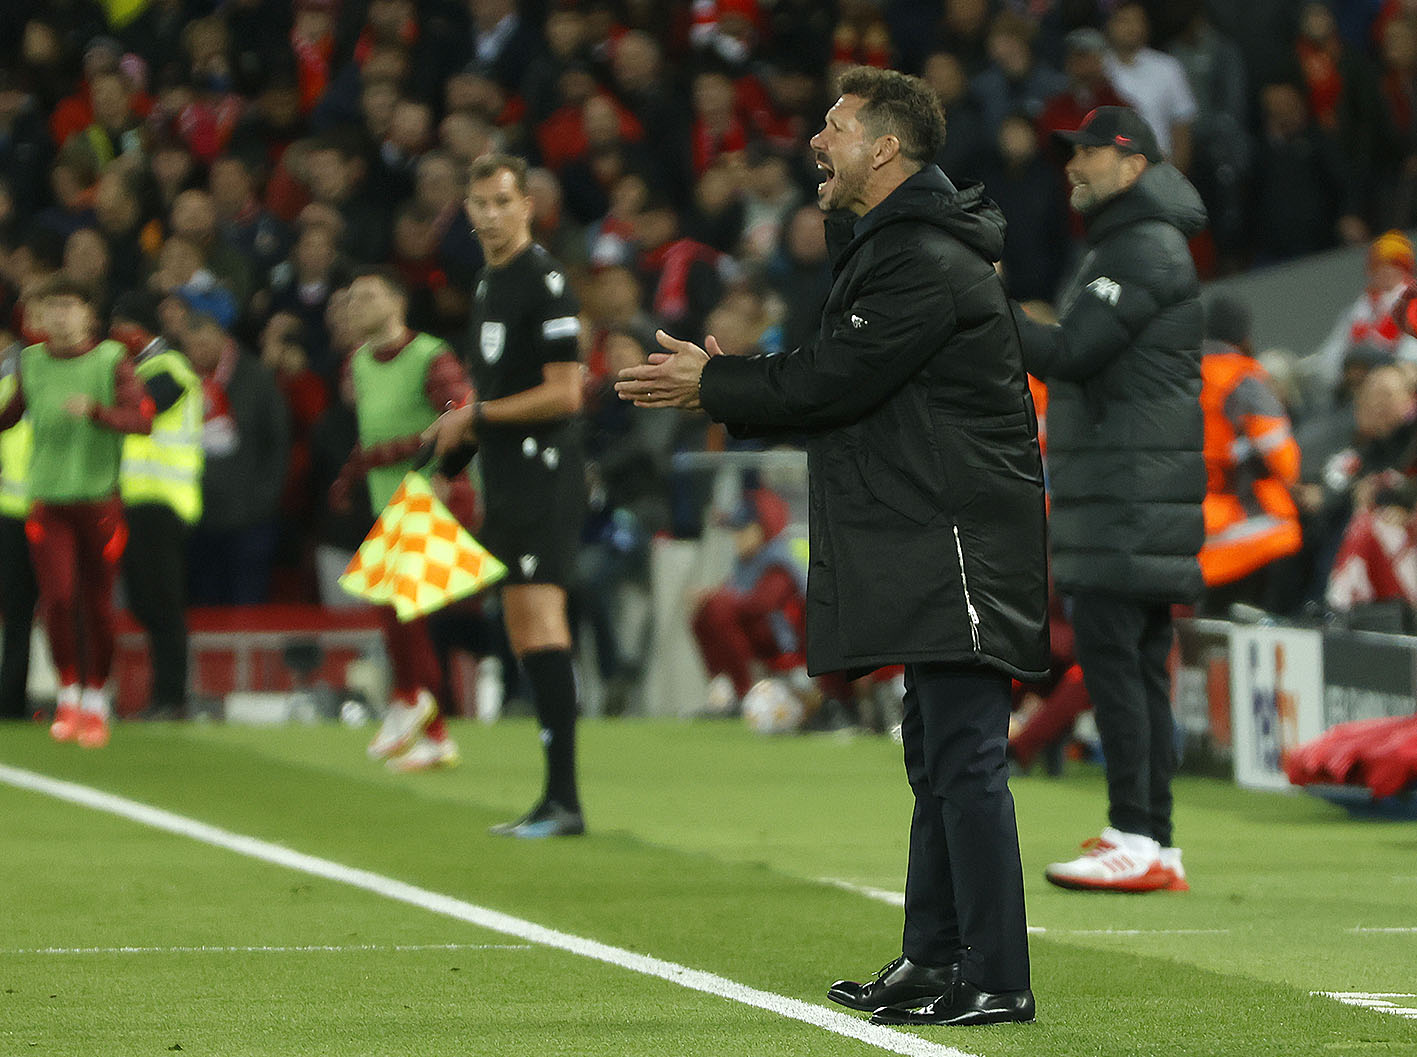 Diego Simeone: “We’re leaving with the tranquility of knowing we gave everything”